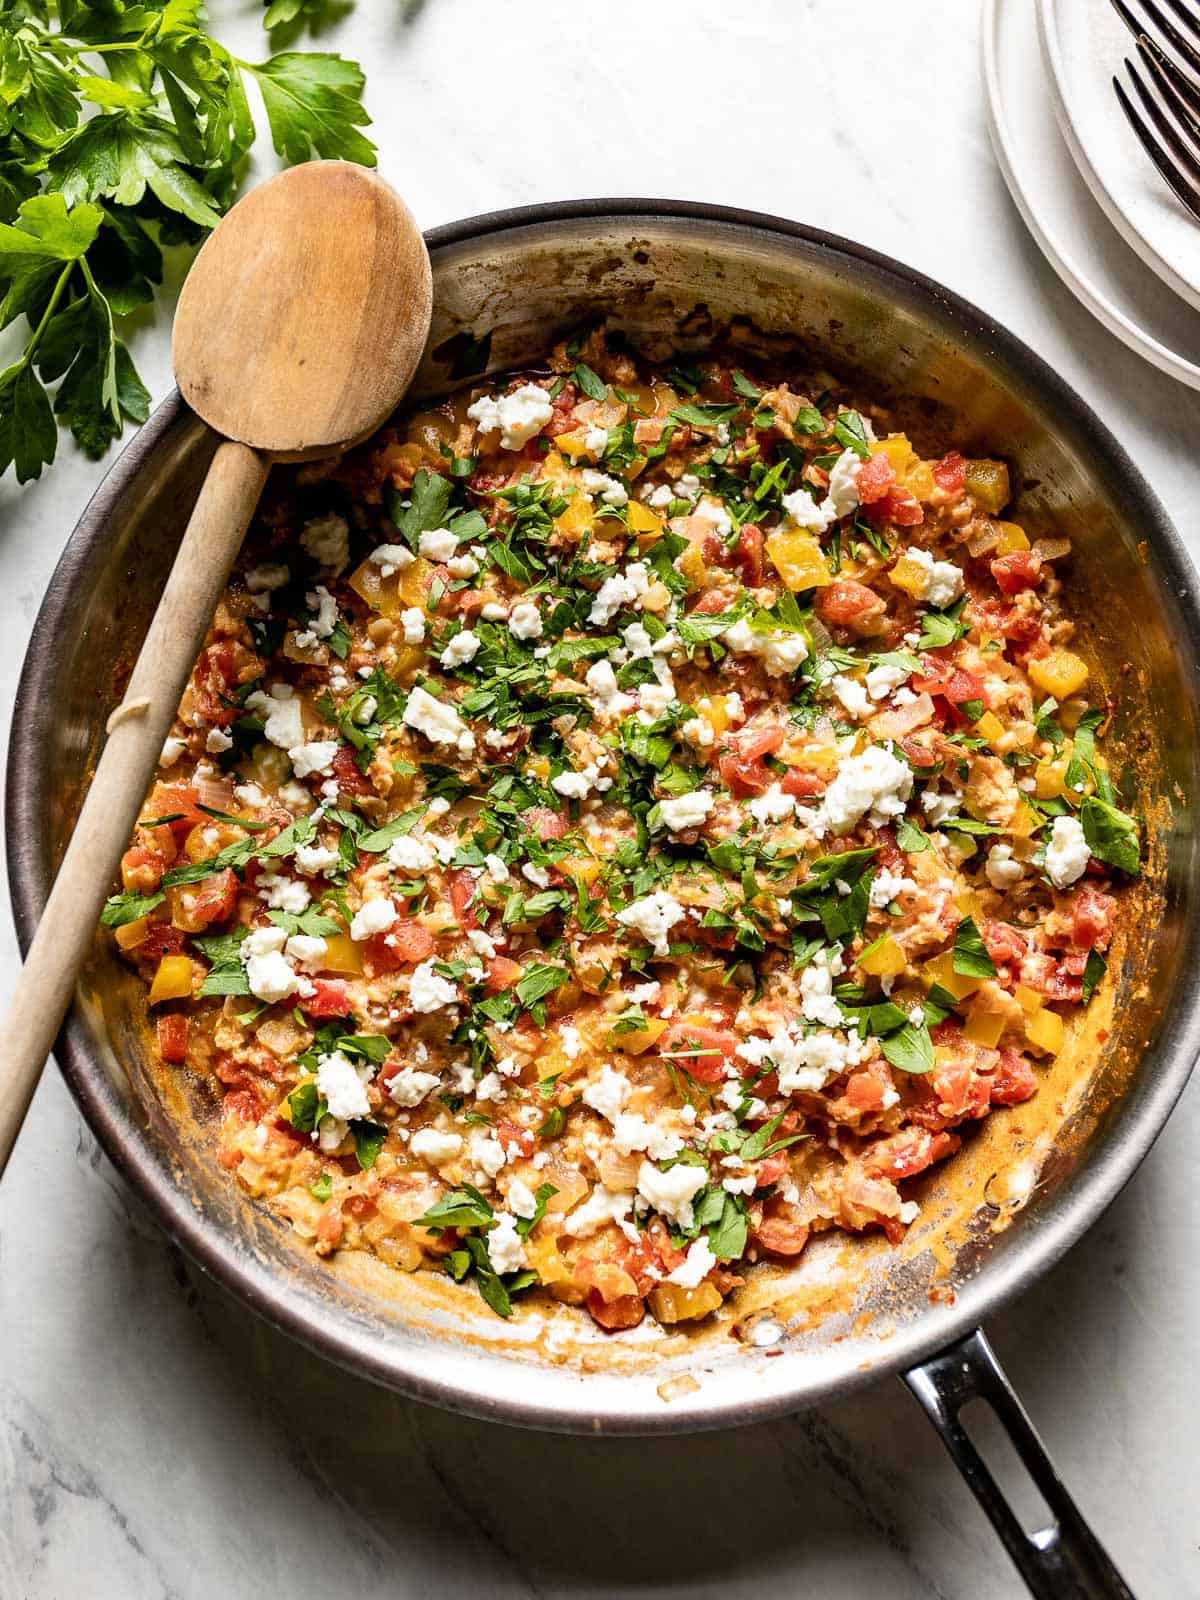 Overhead view of a skillet full of menemen with a wooden spoon.